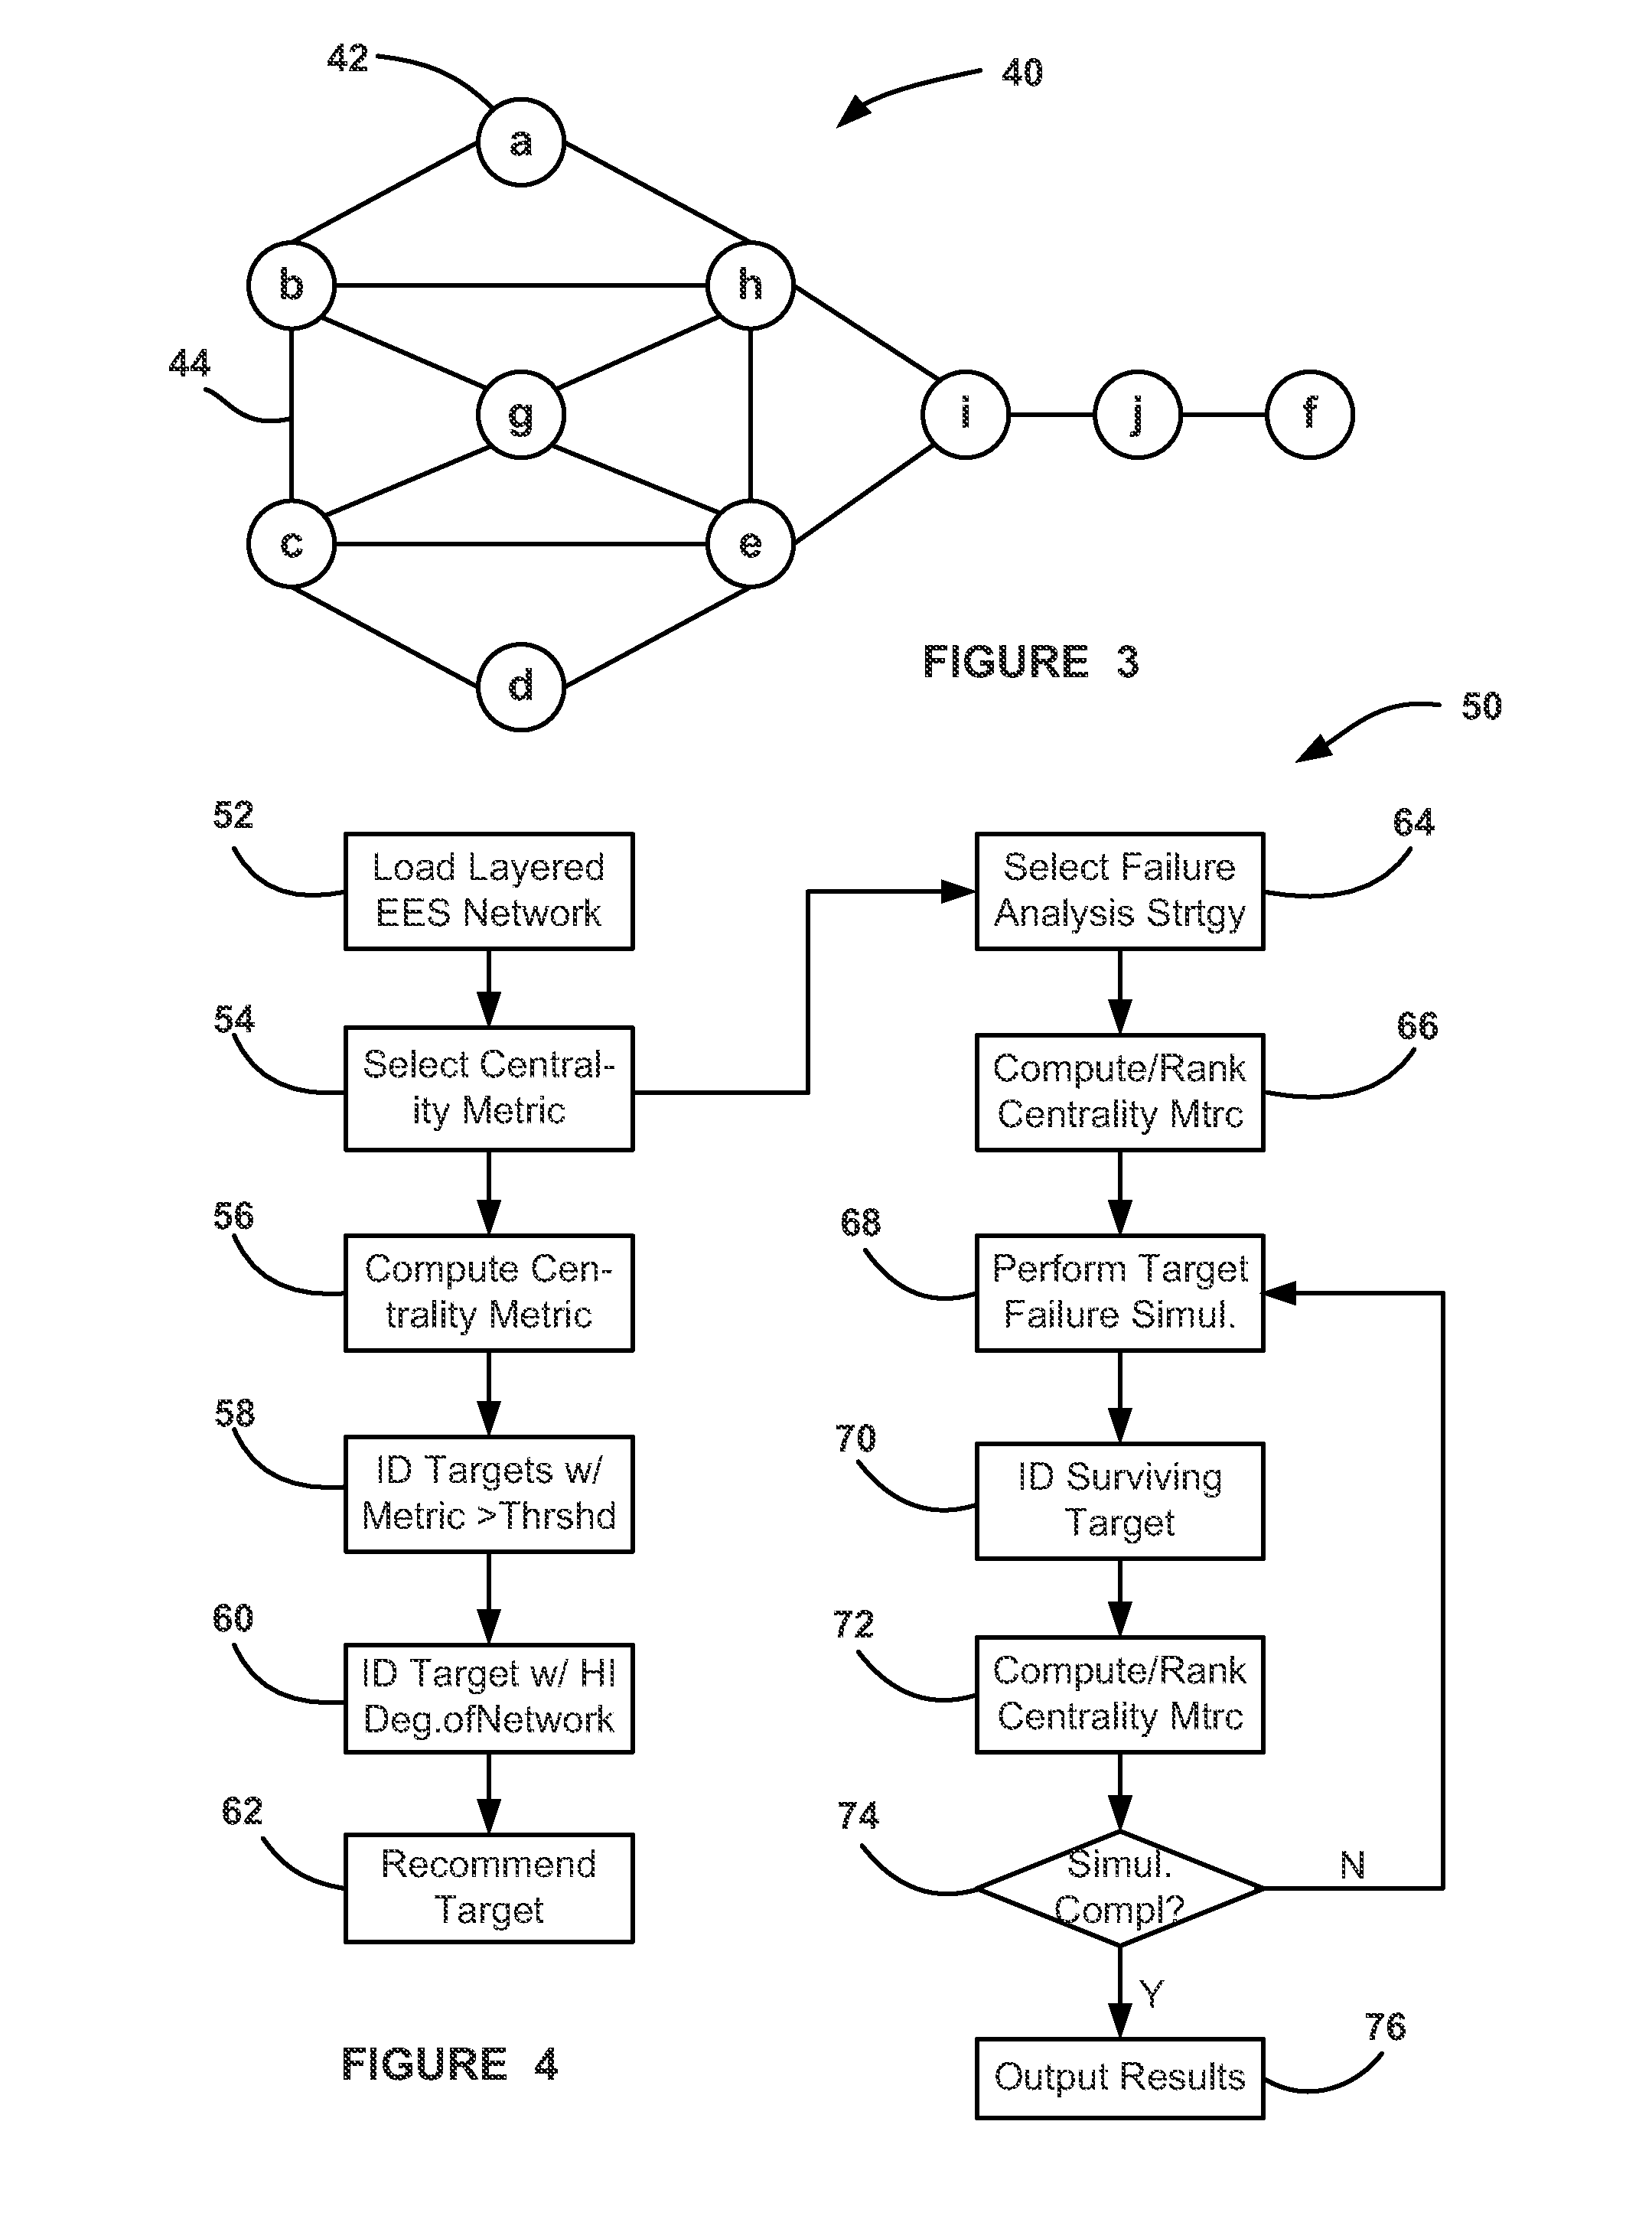 System and methods for fault-isolation and fault-mitigation based on network modeling